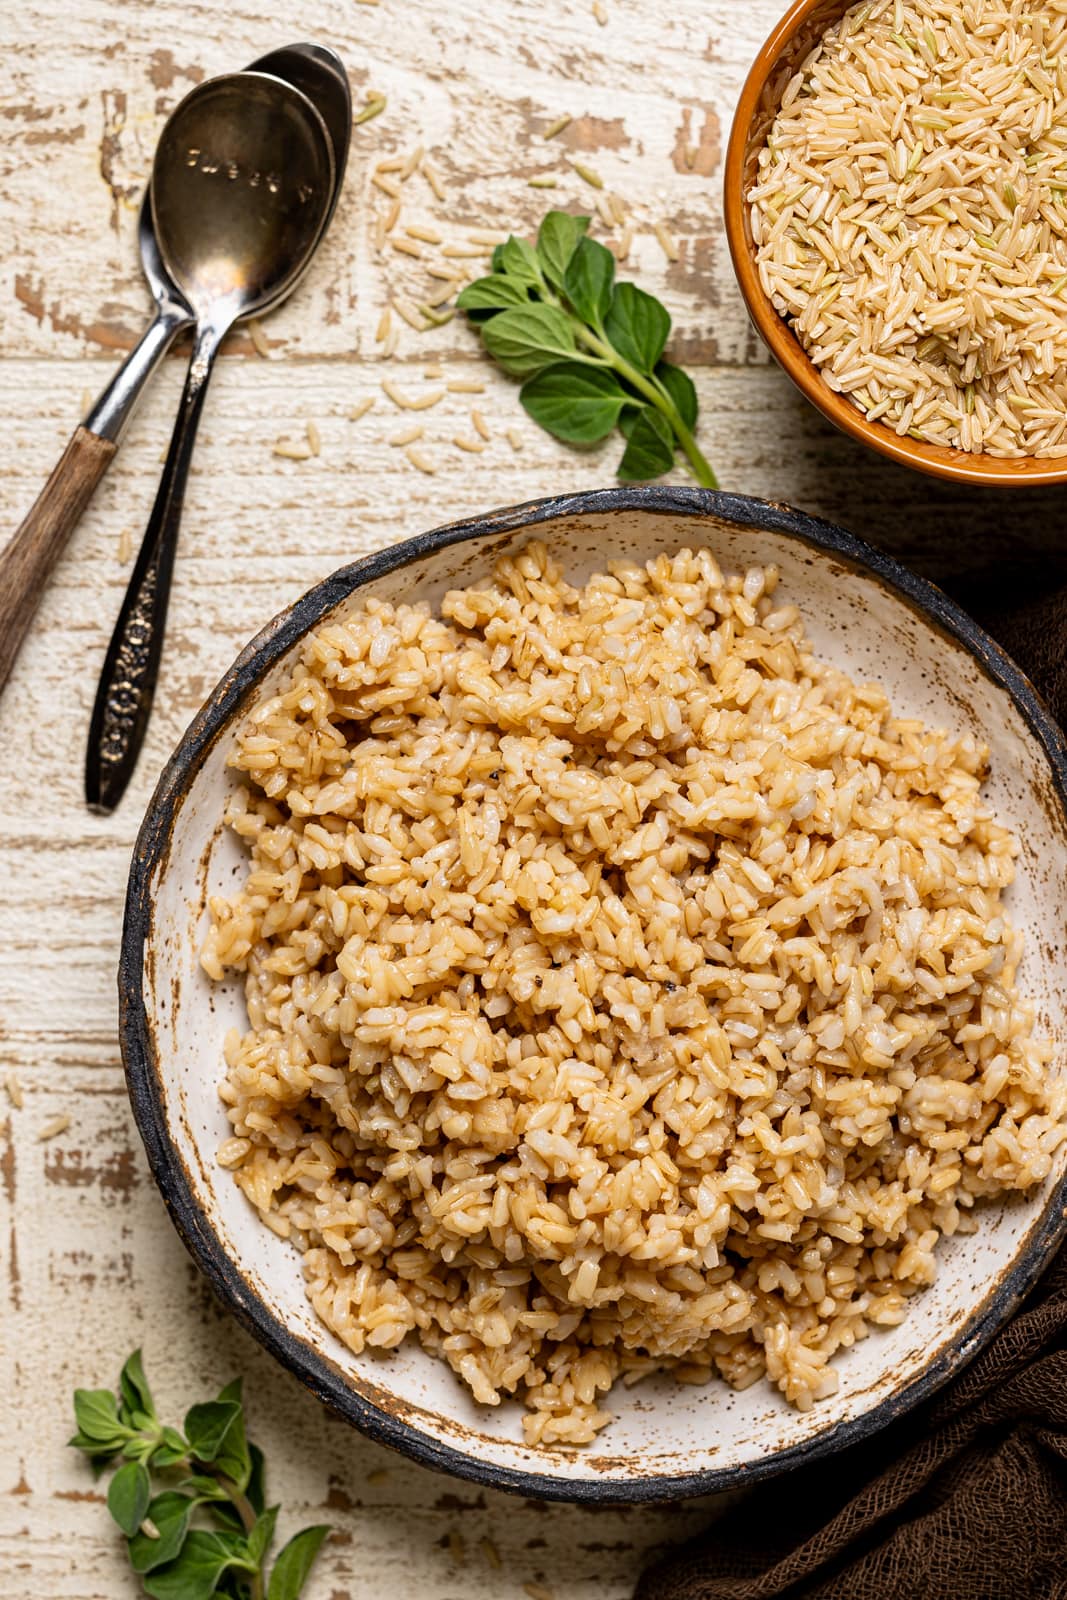 Rice in a bowl with two spoons and dry rice grains.